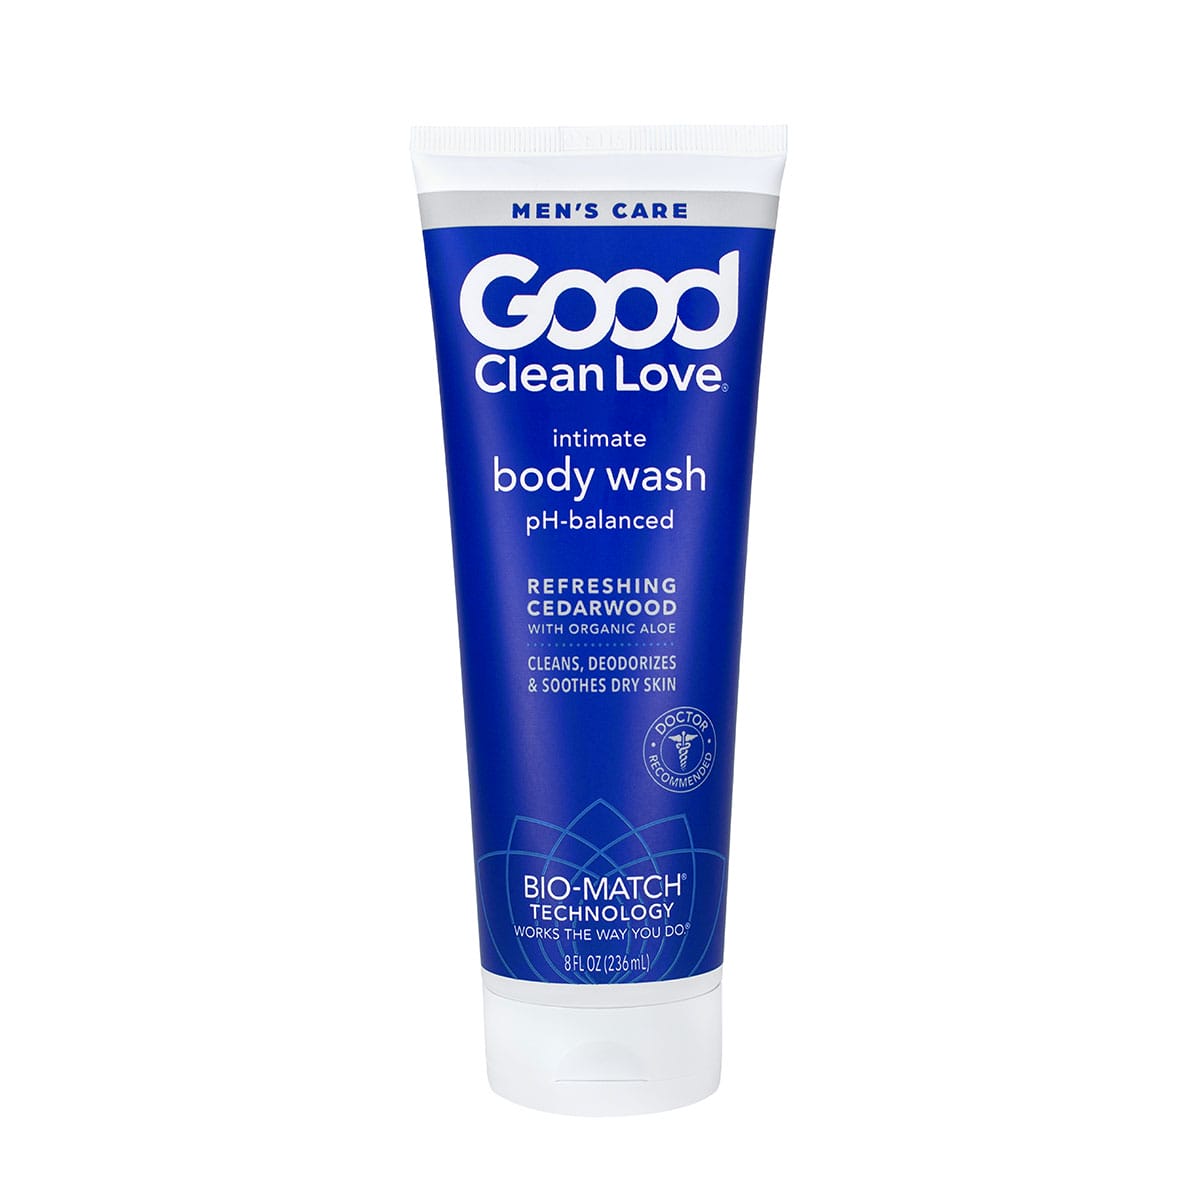 Buy Good Clean Love Men's Intimate Body Wash 8oz intimate cleansing care for her.